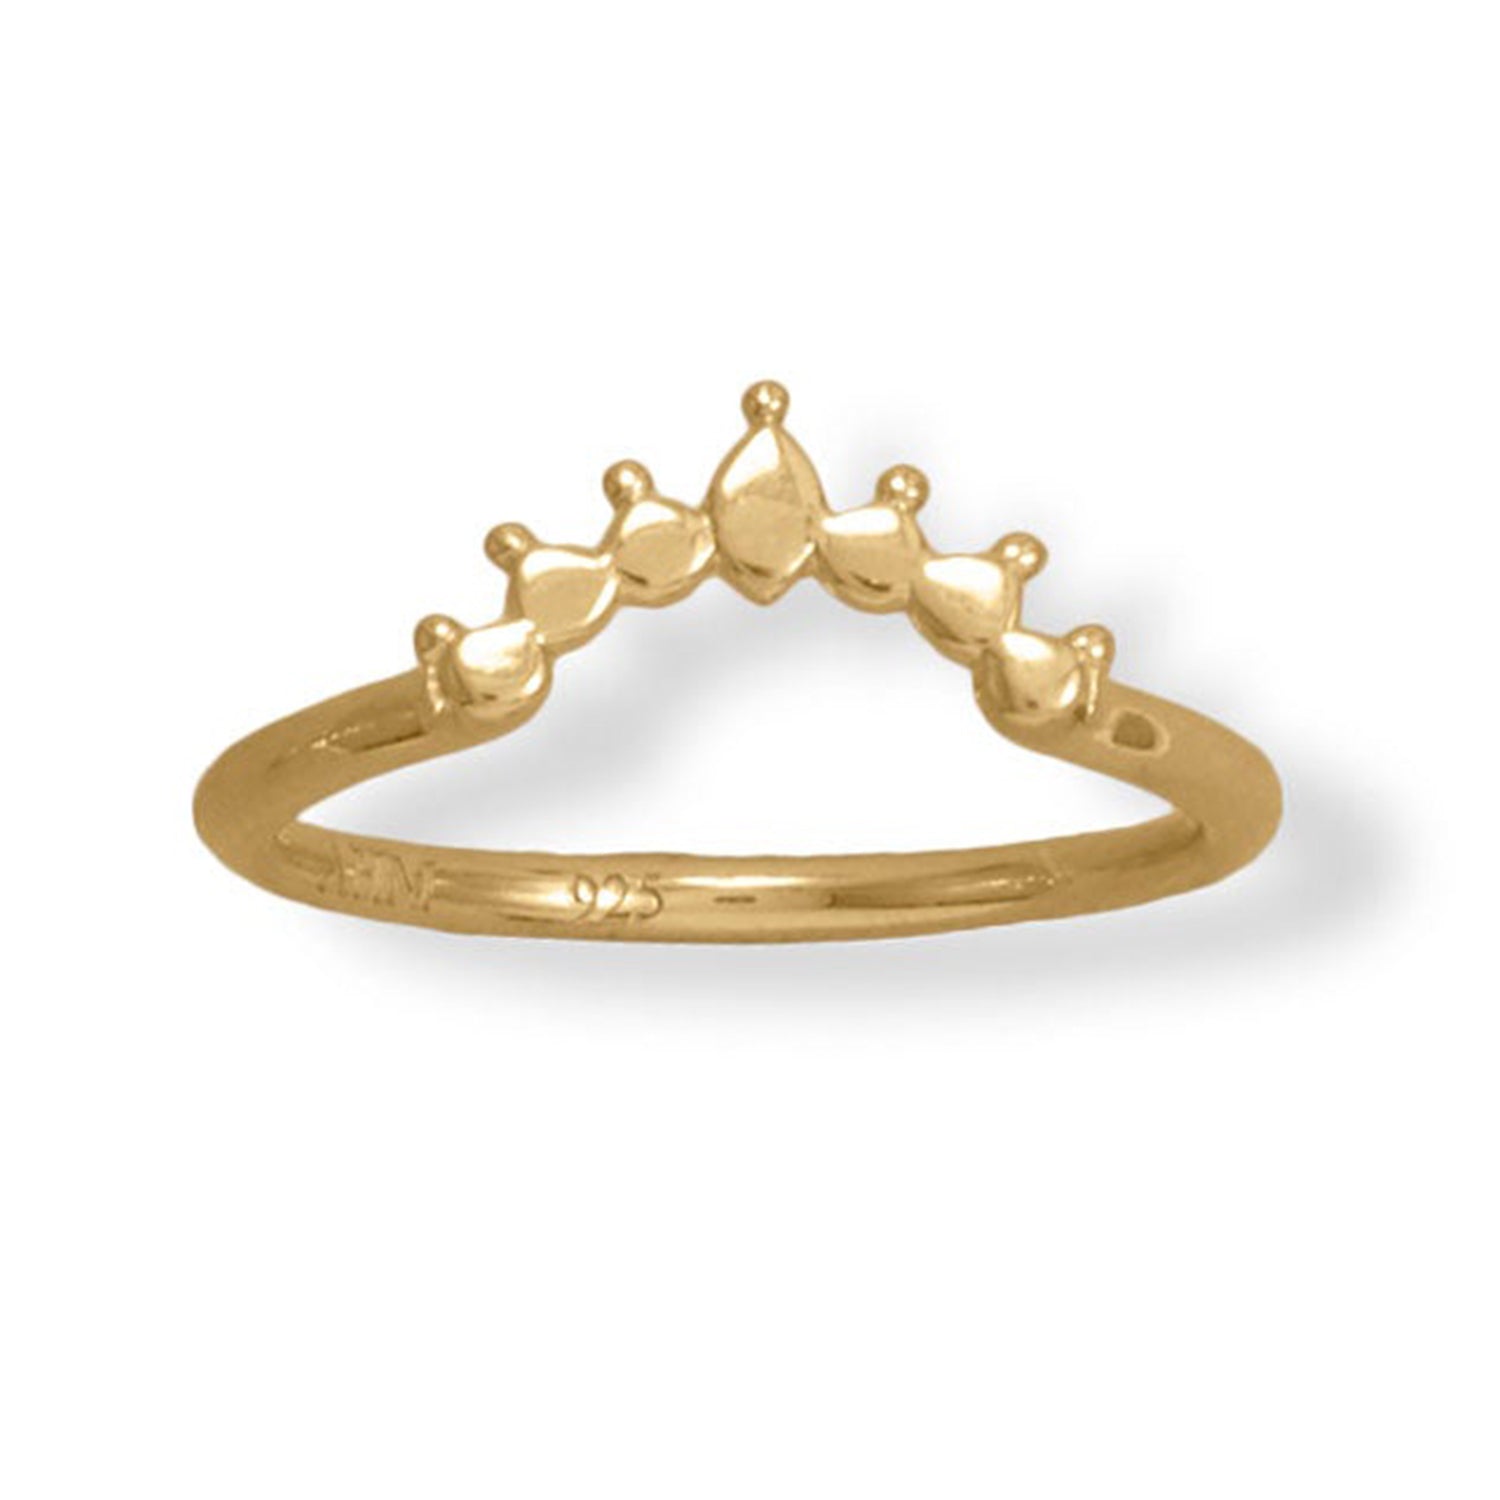 Crown Themed Diamond Gold Ring Design For Any Special Occasion